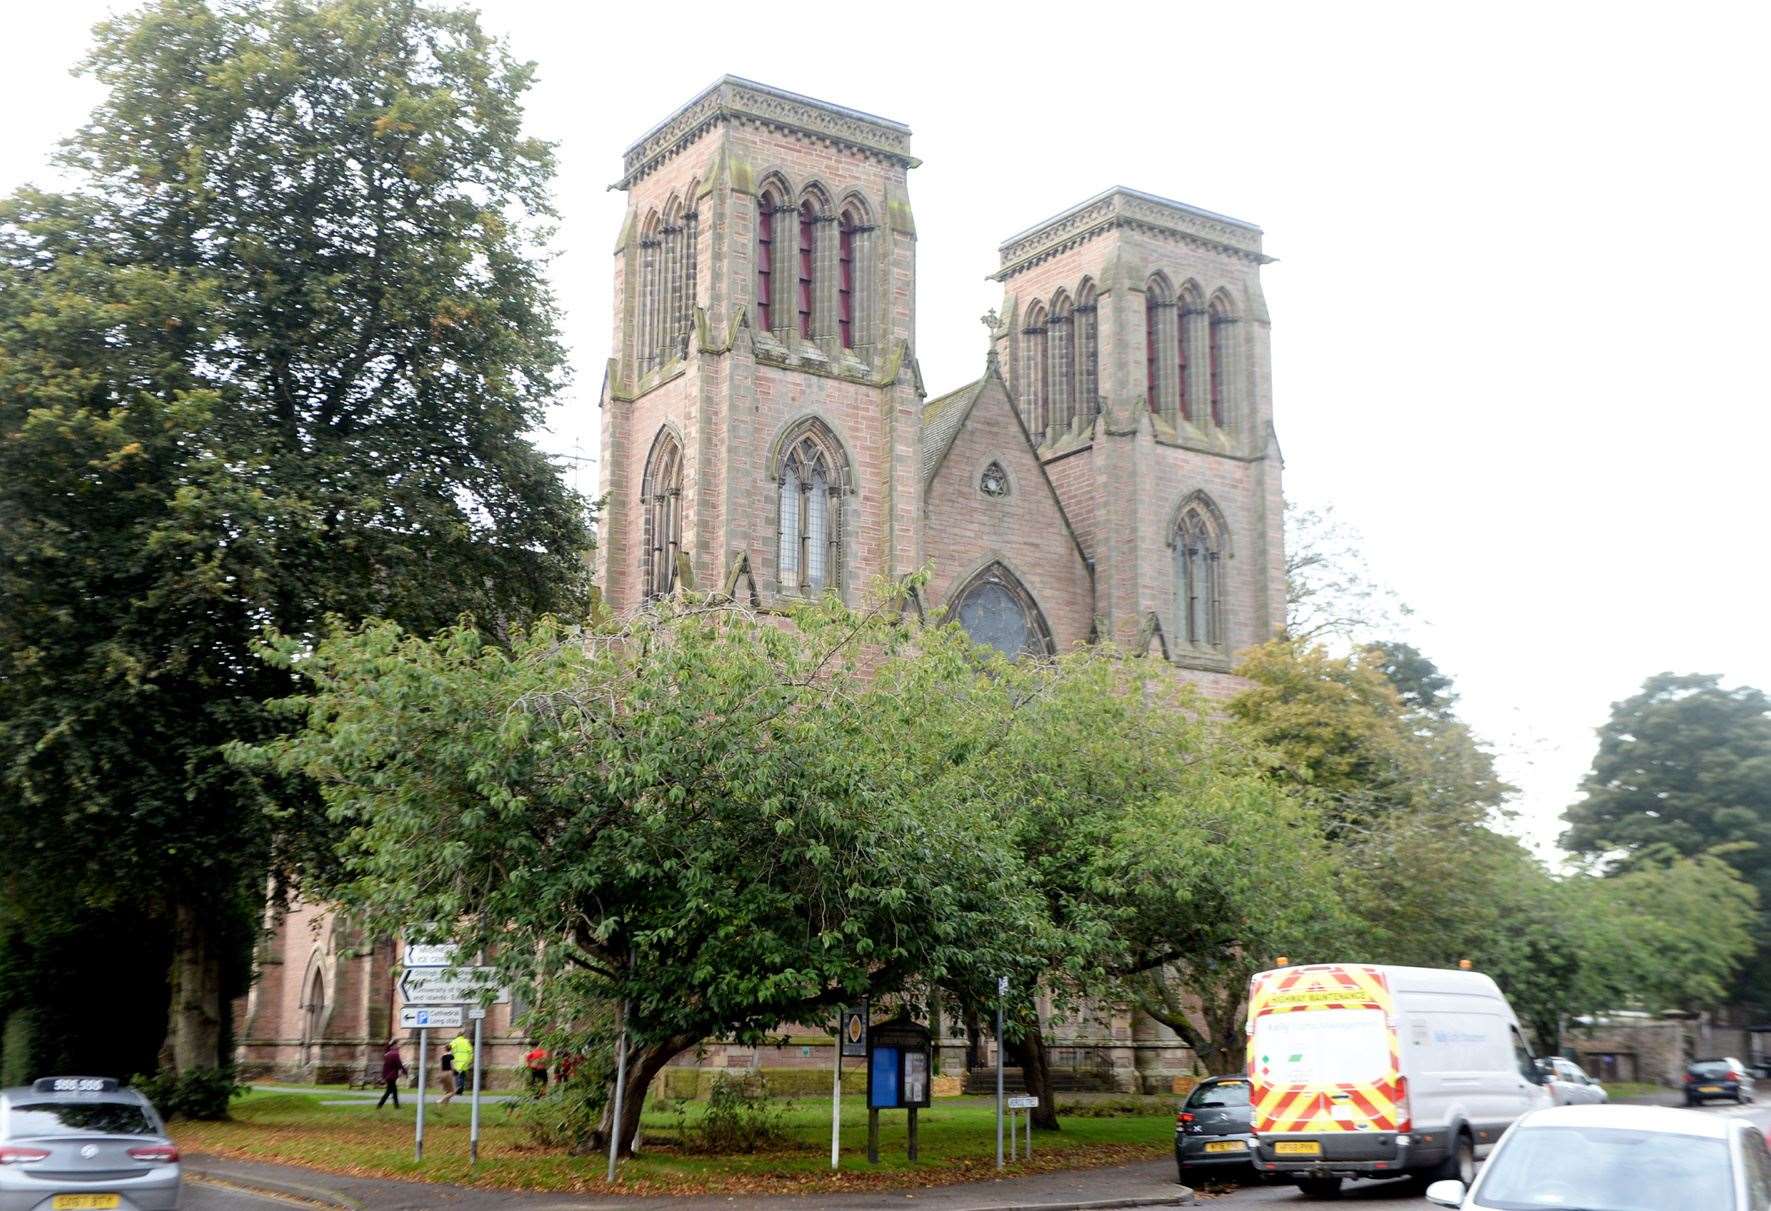 Inverness Cathedral will provide the venue for the show's first outing.